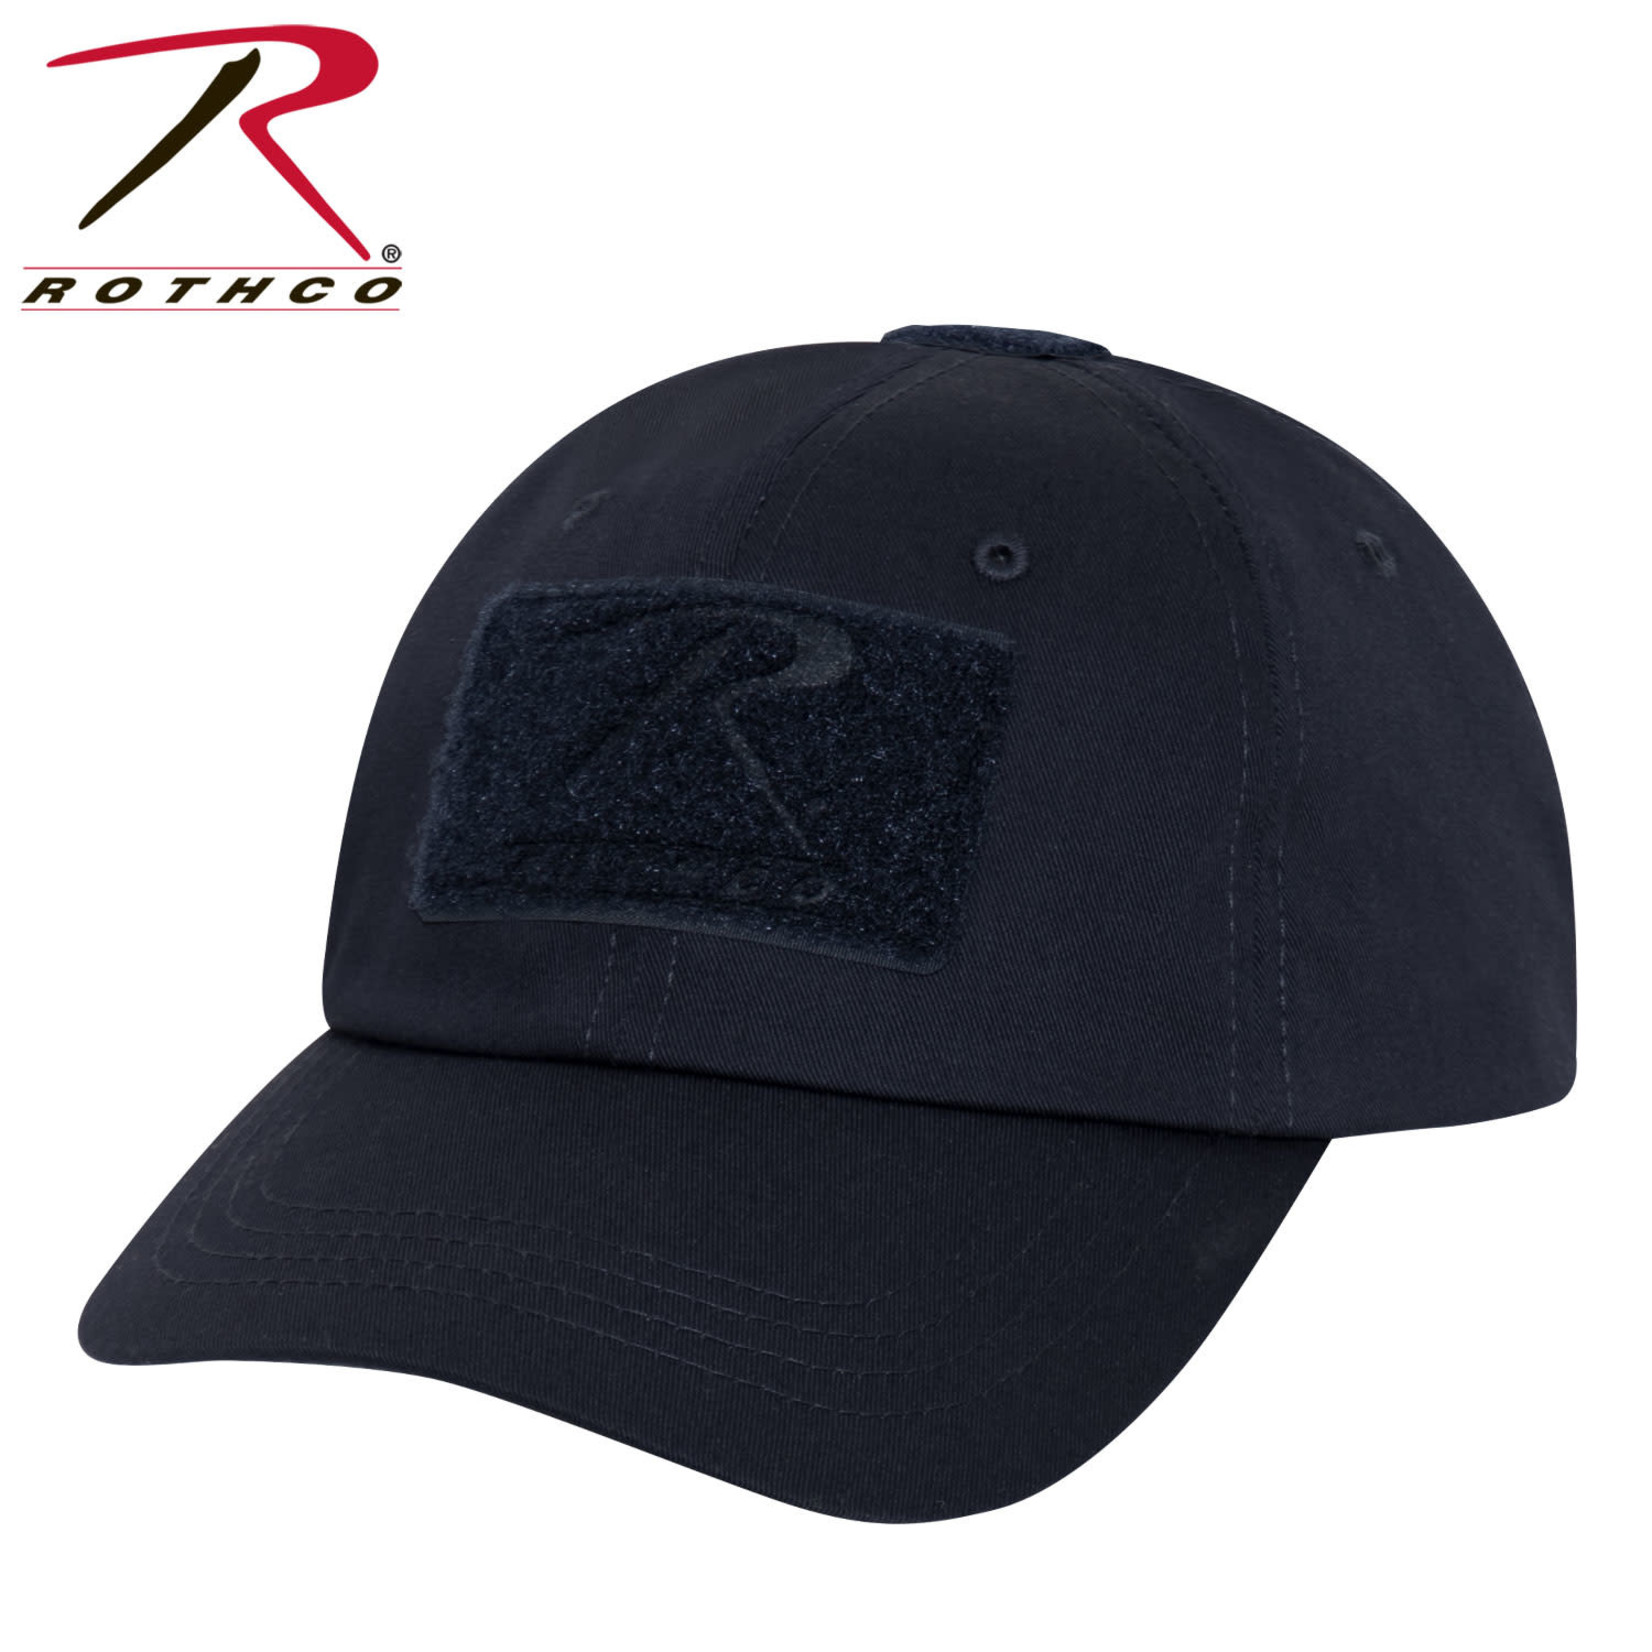 Rothco Rothco Patch-Ready Solid Color Tactical Cap